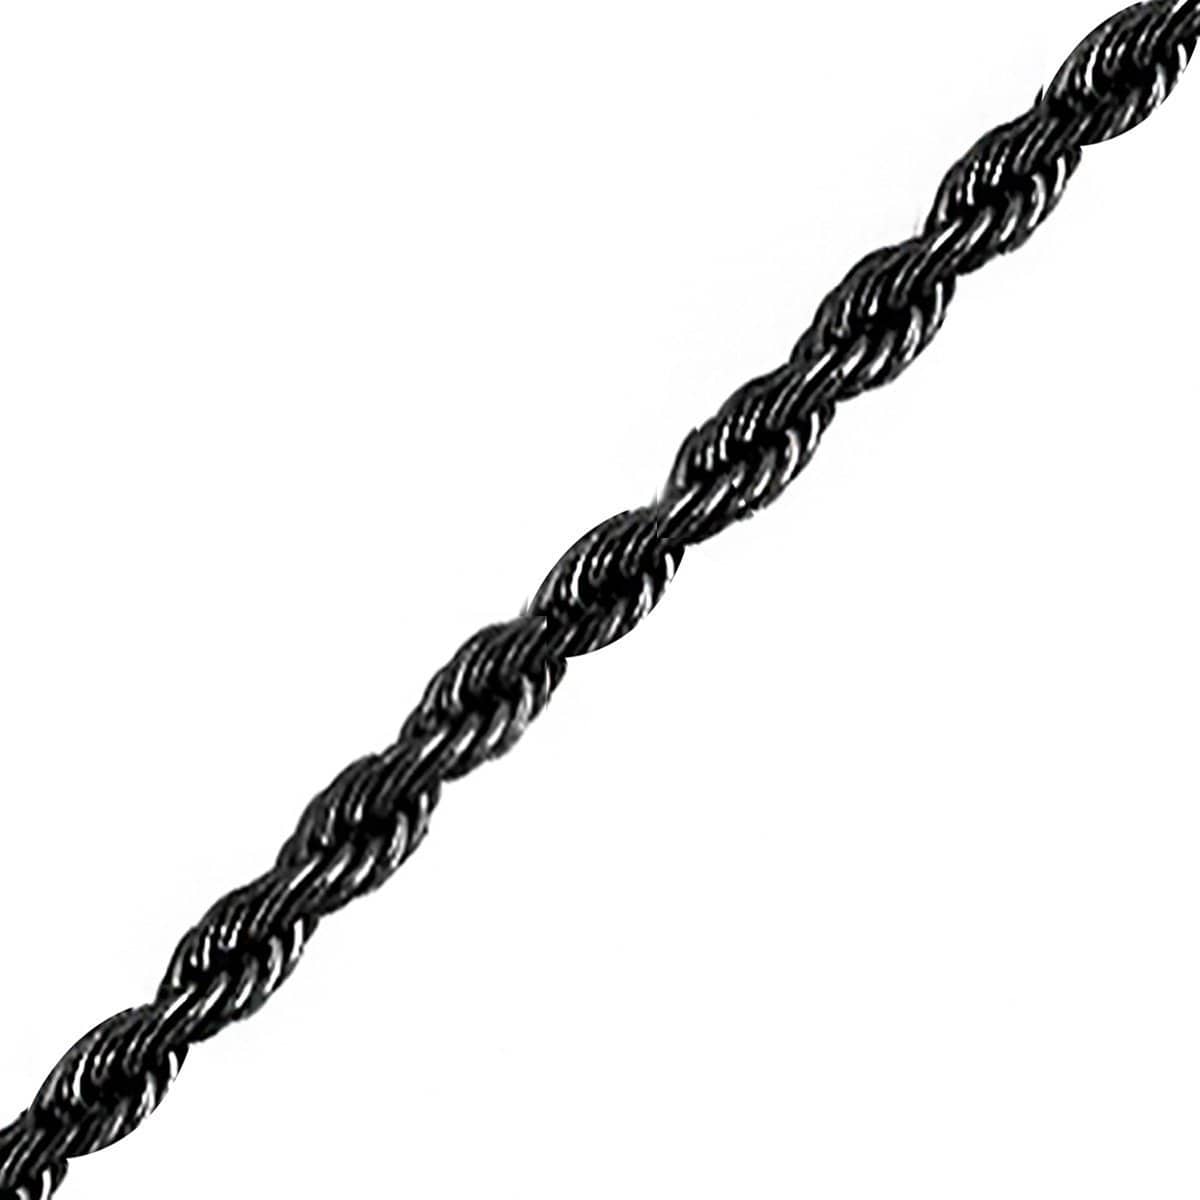 INOX JEWELRY Chains Black Stainless Steel Polished 3mm Rope Chain